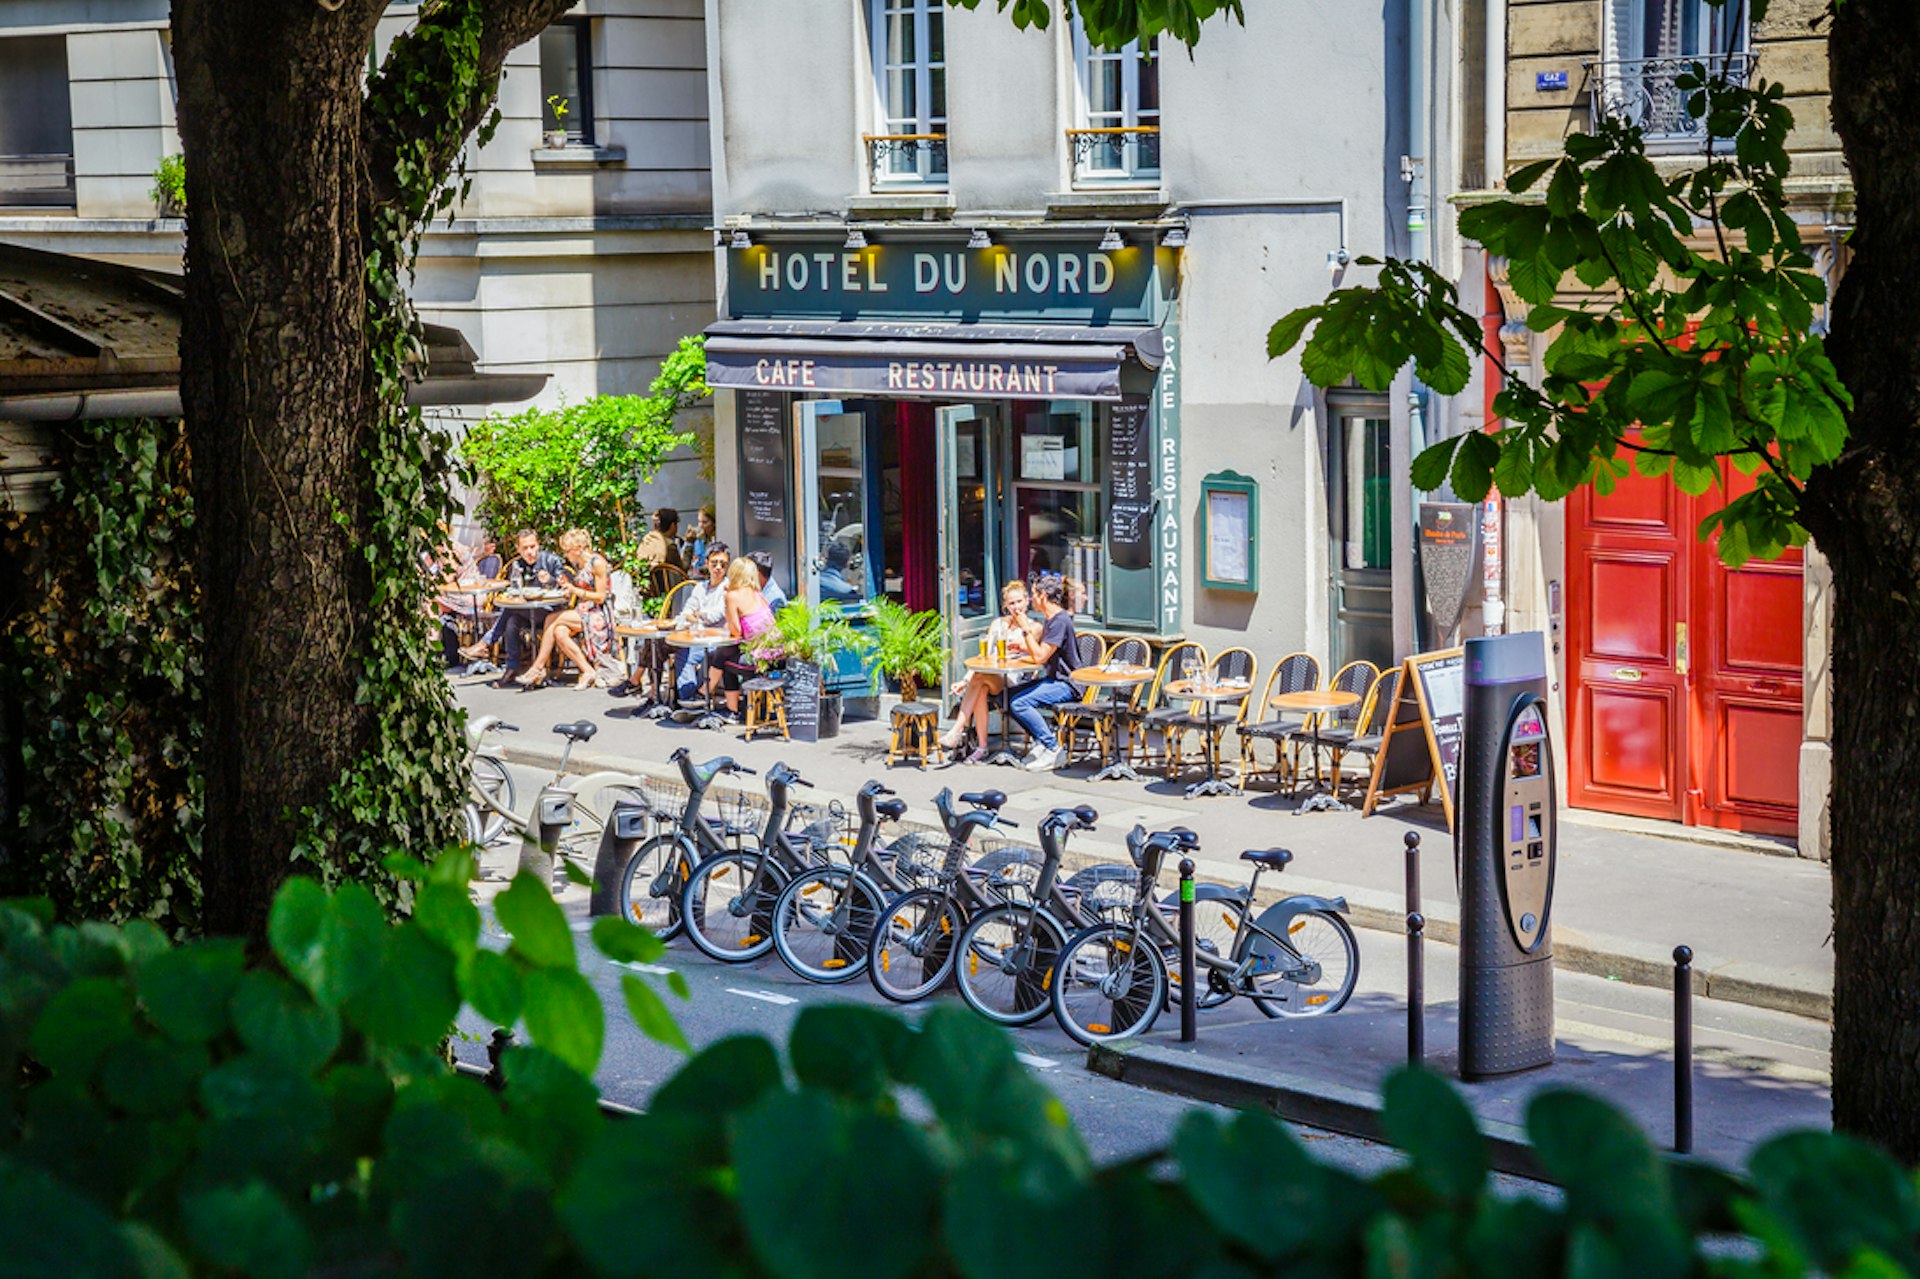 People eating and drinking on the terrace of the famous Hotel du Nord with bike share in the foreground